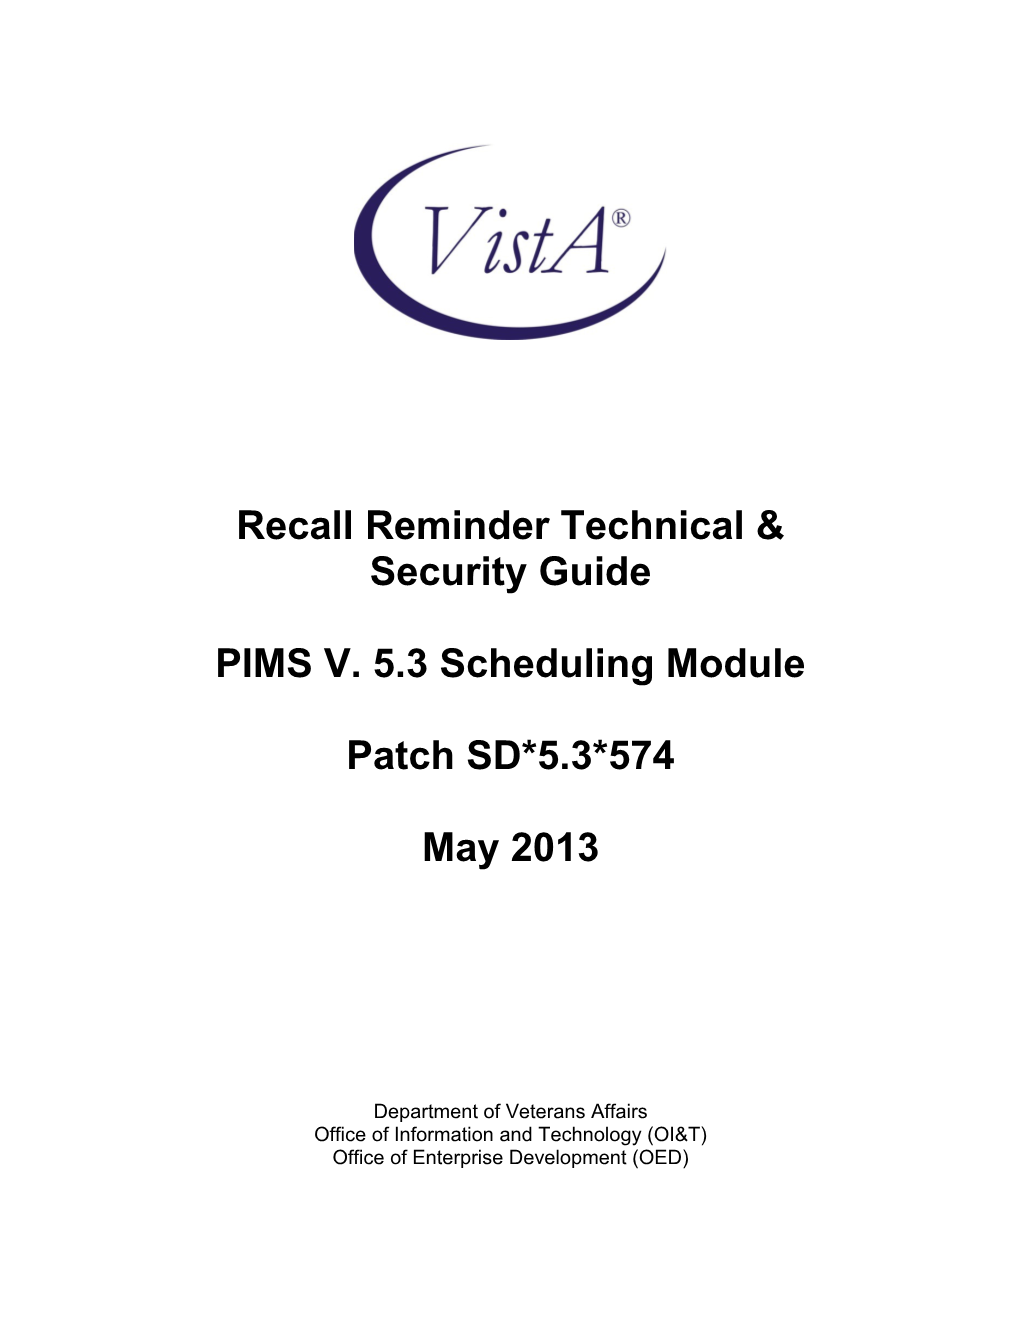 Recall Reminder Technical & Security Guide